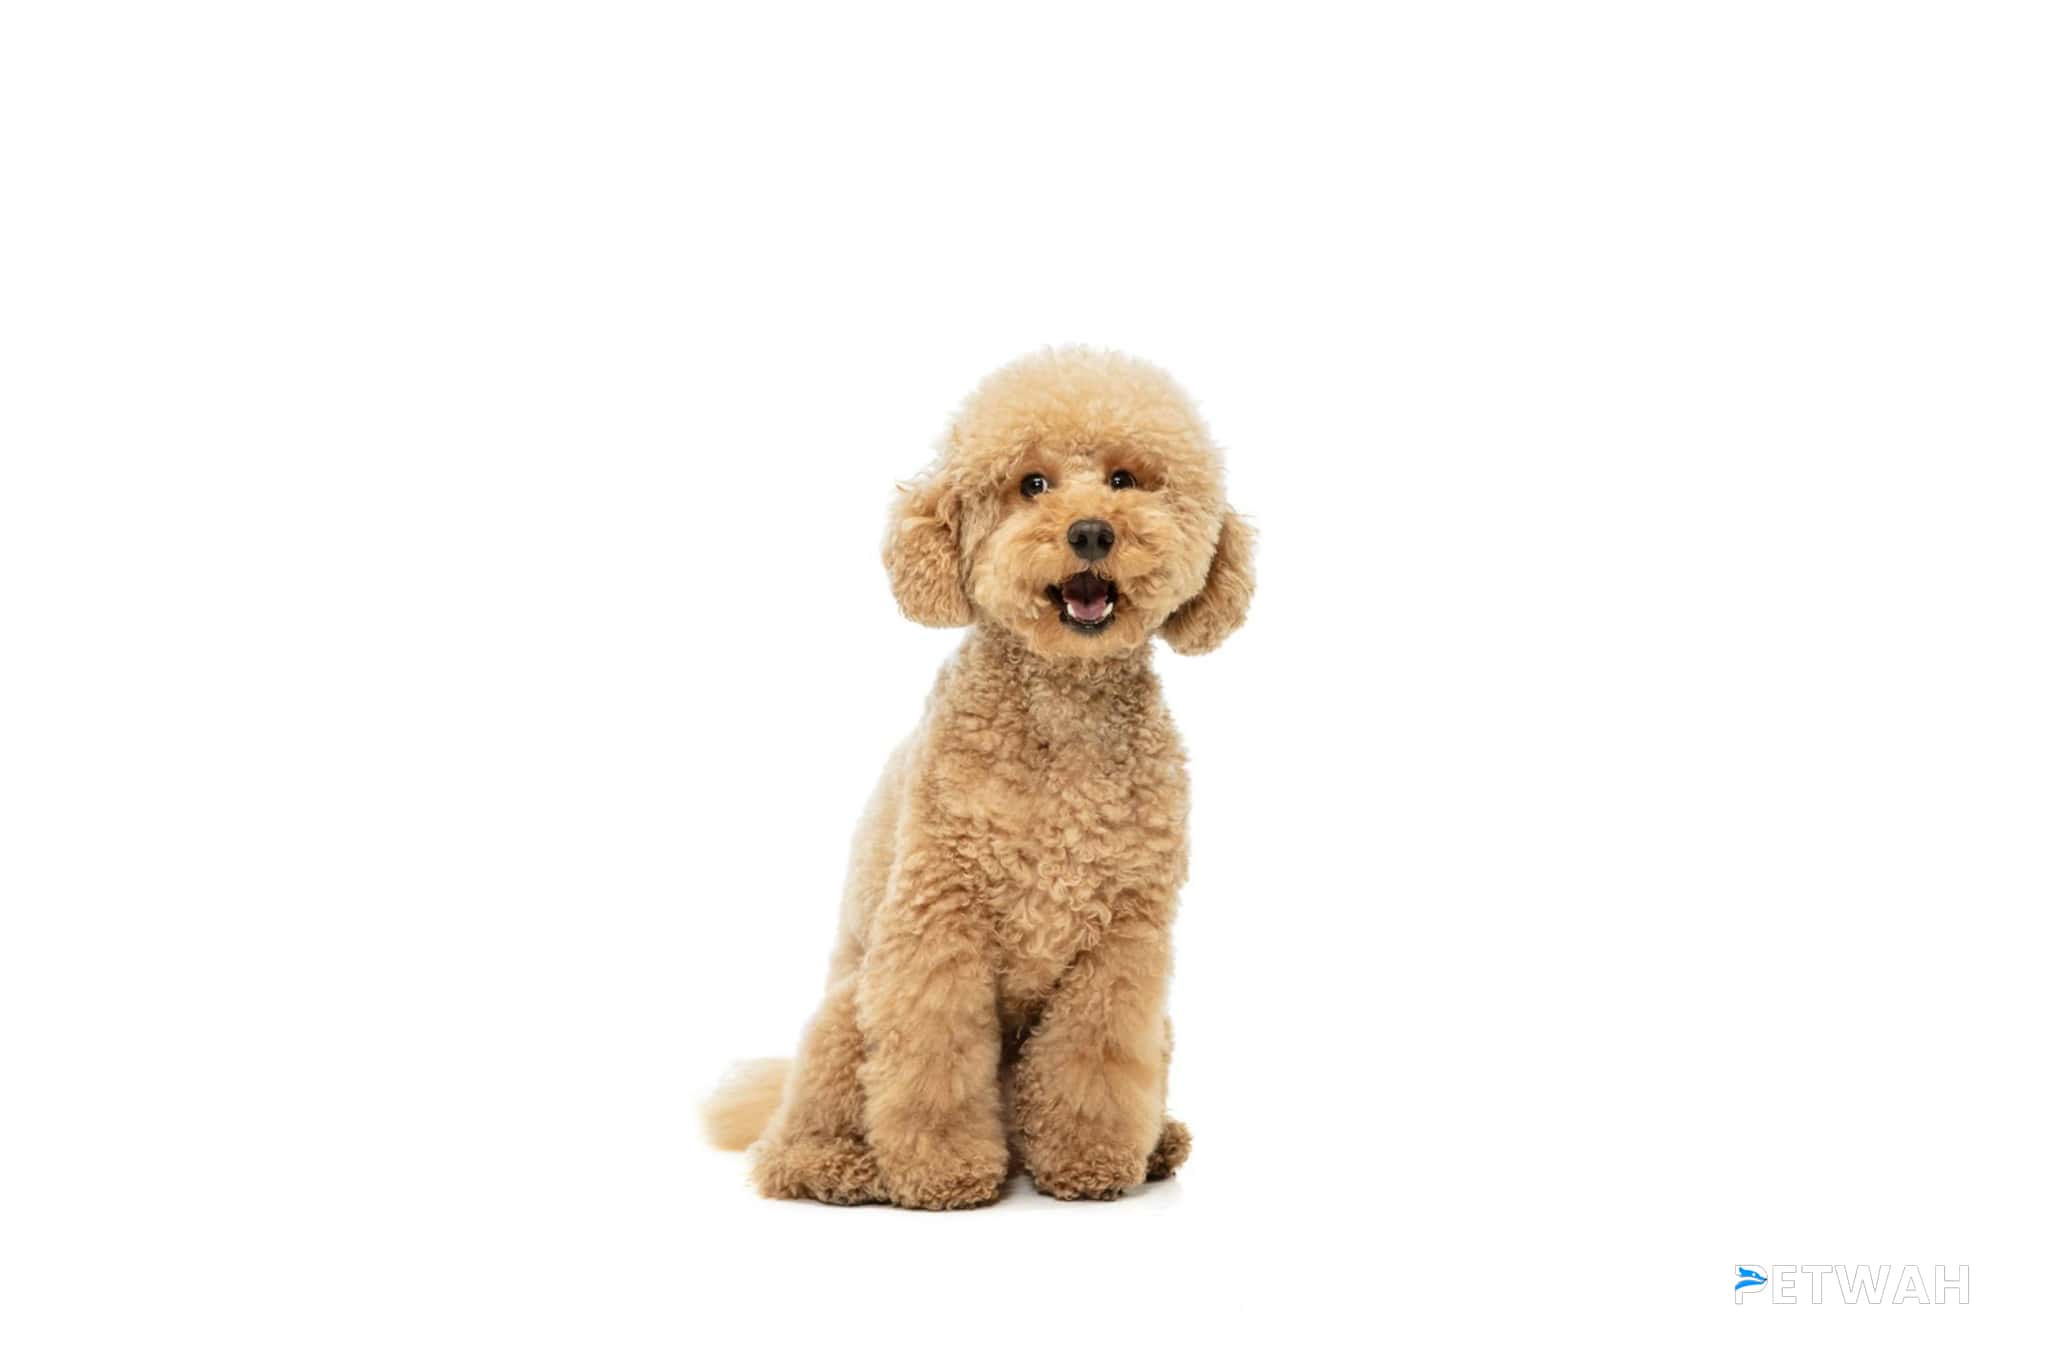 Incorporating Your Poodle into Daily Activities Stress-Free